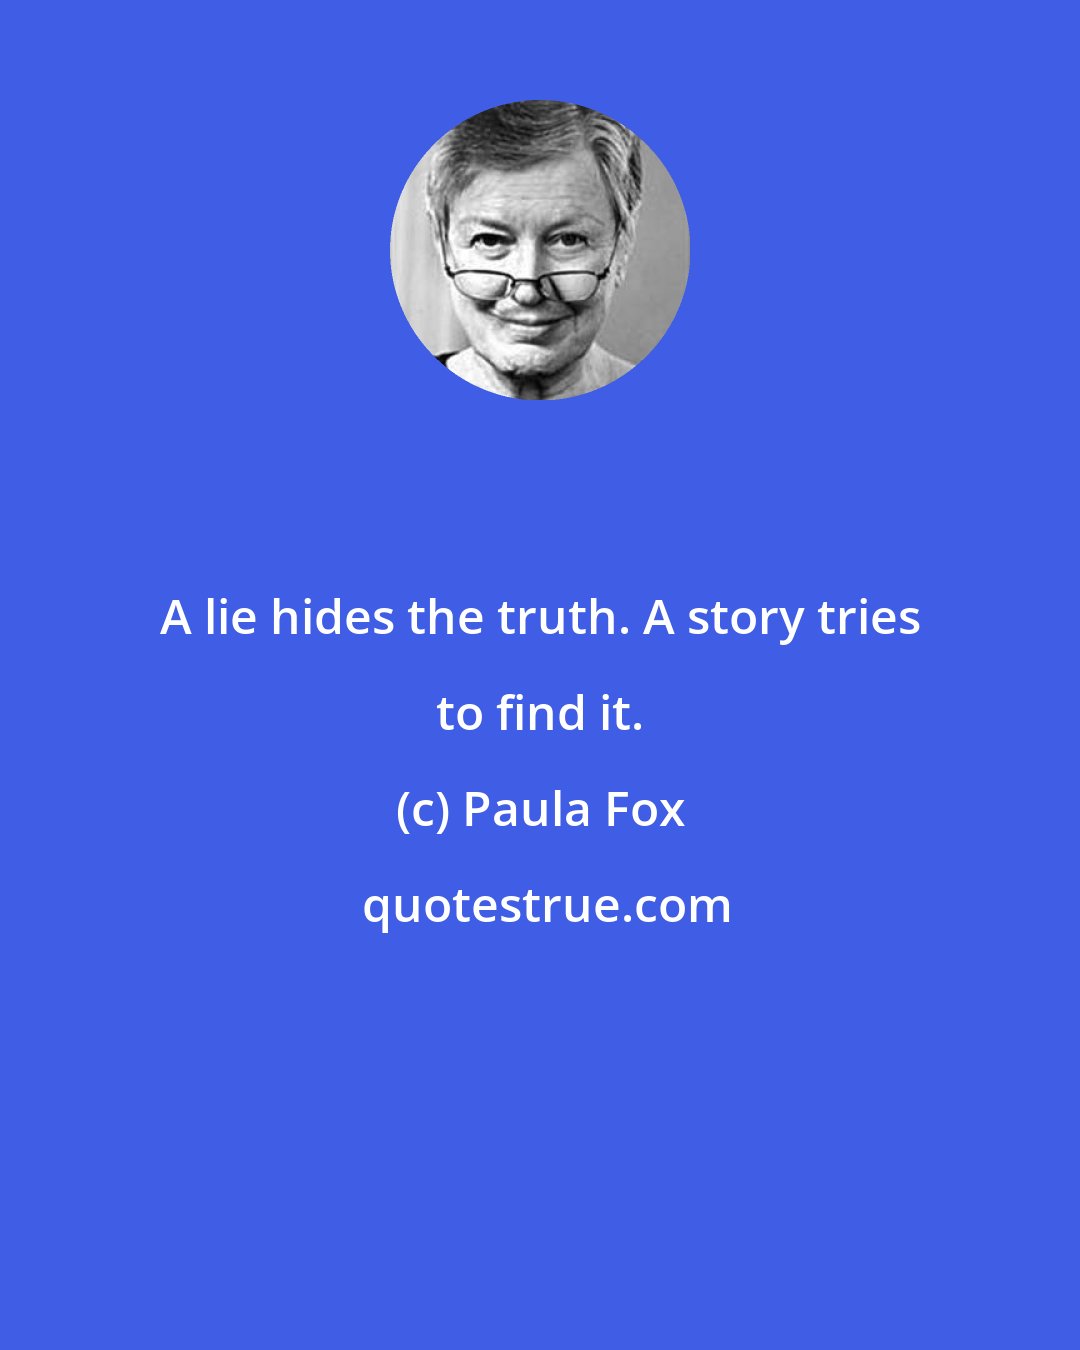 Paula Fox: A lie hides the truth. A story tries to find it.